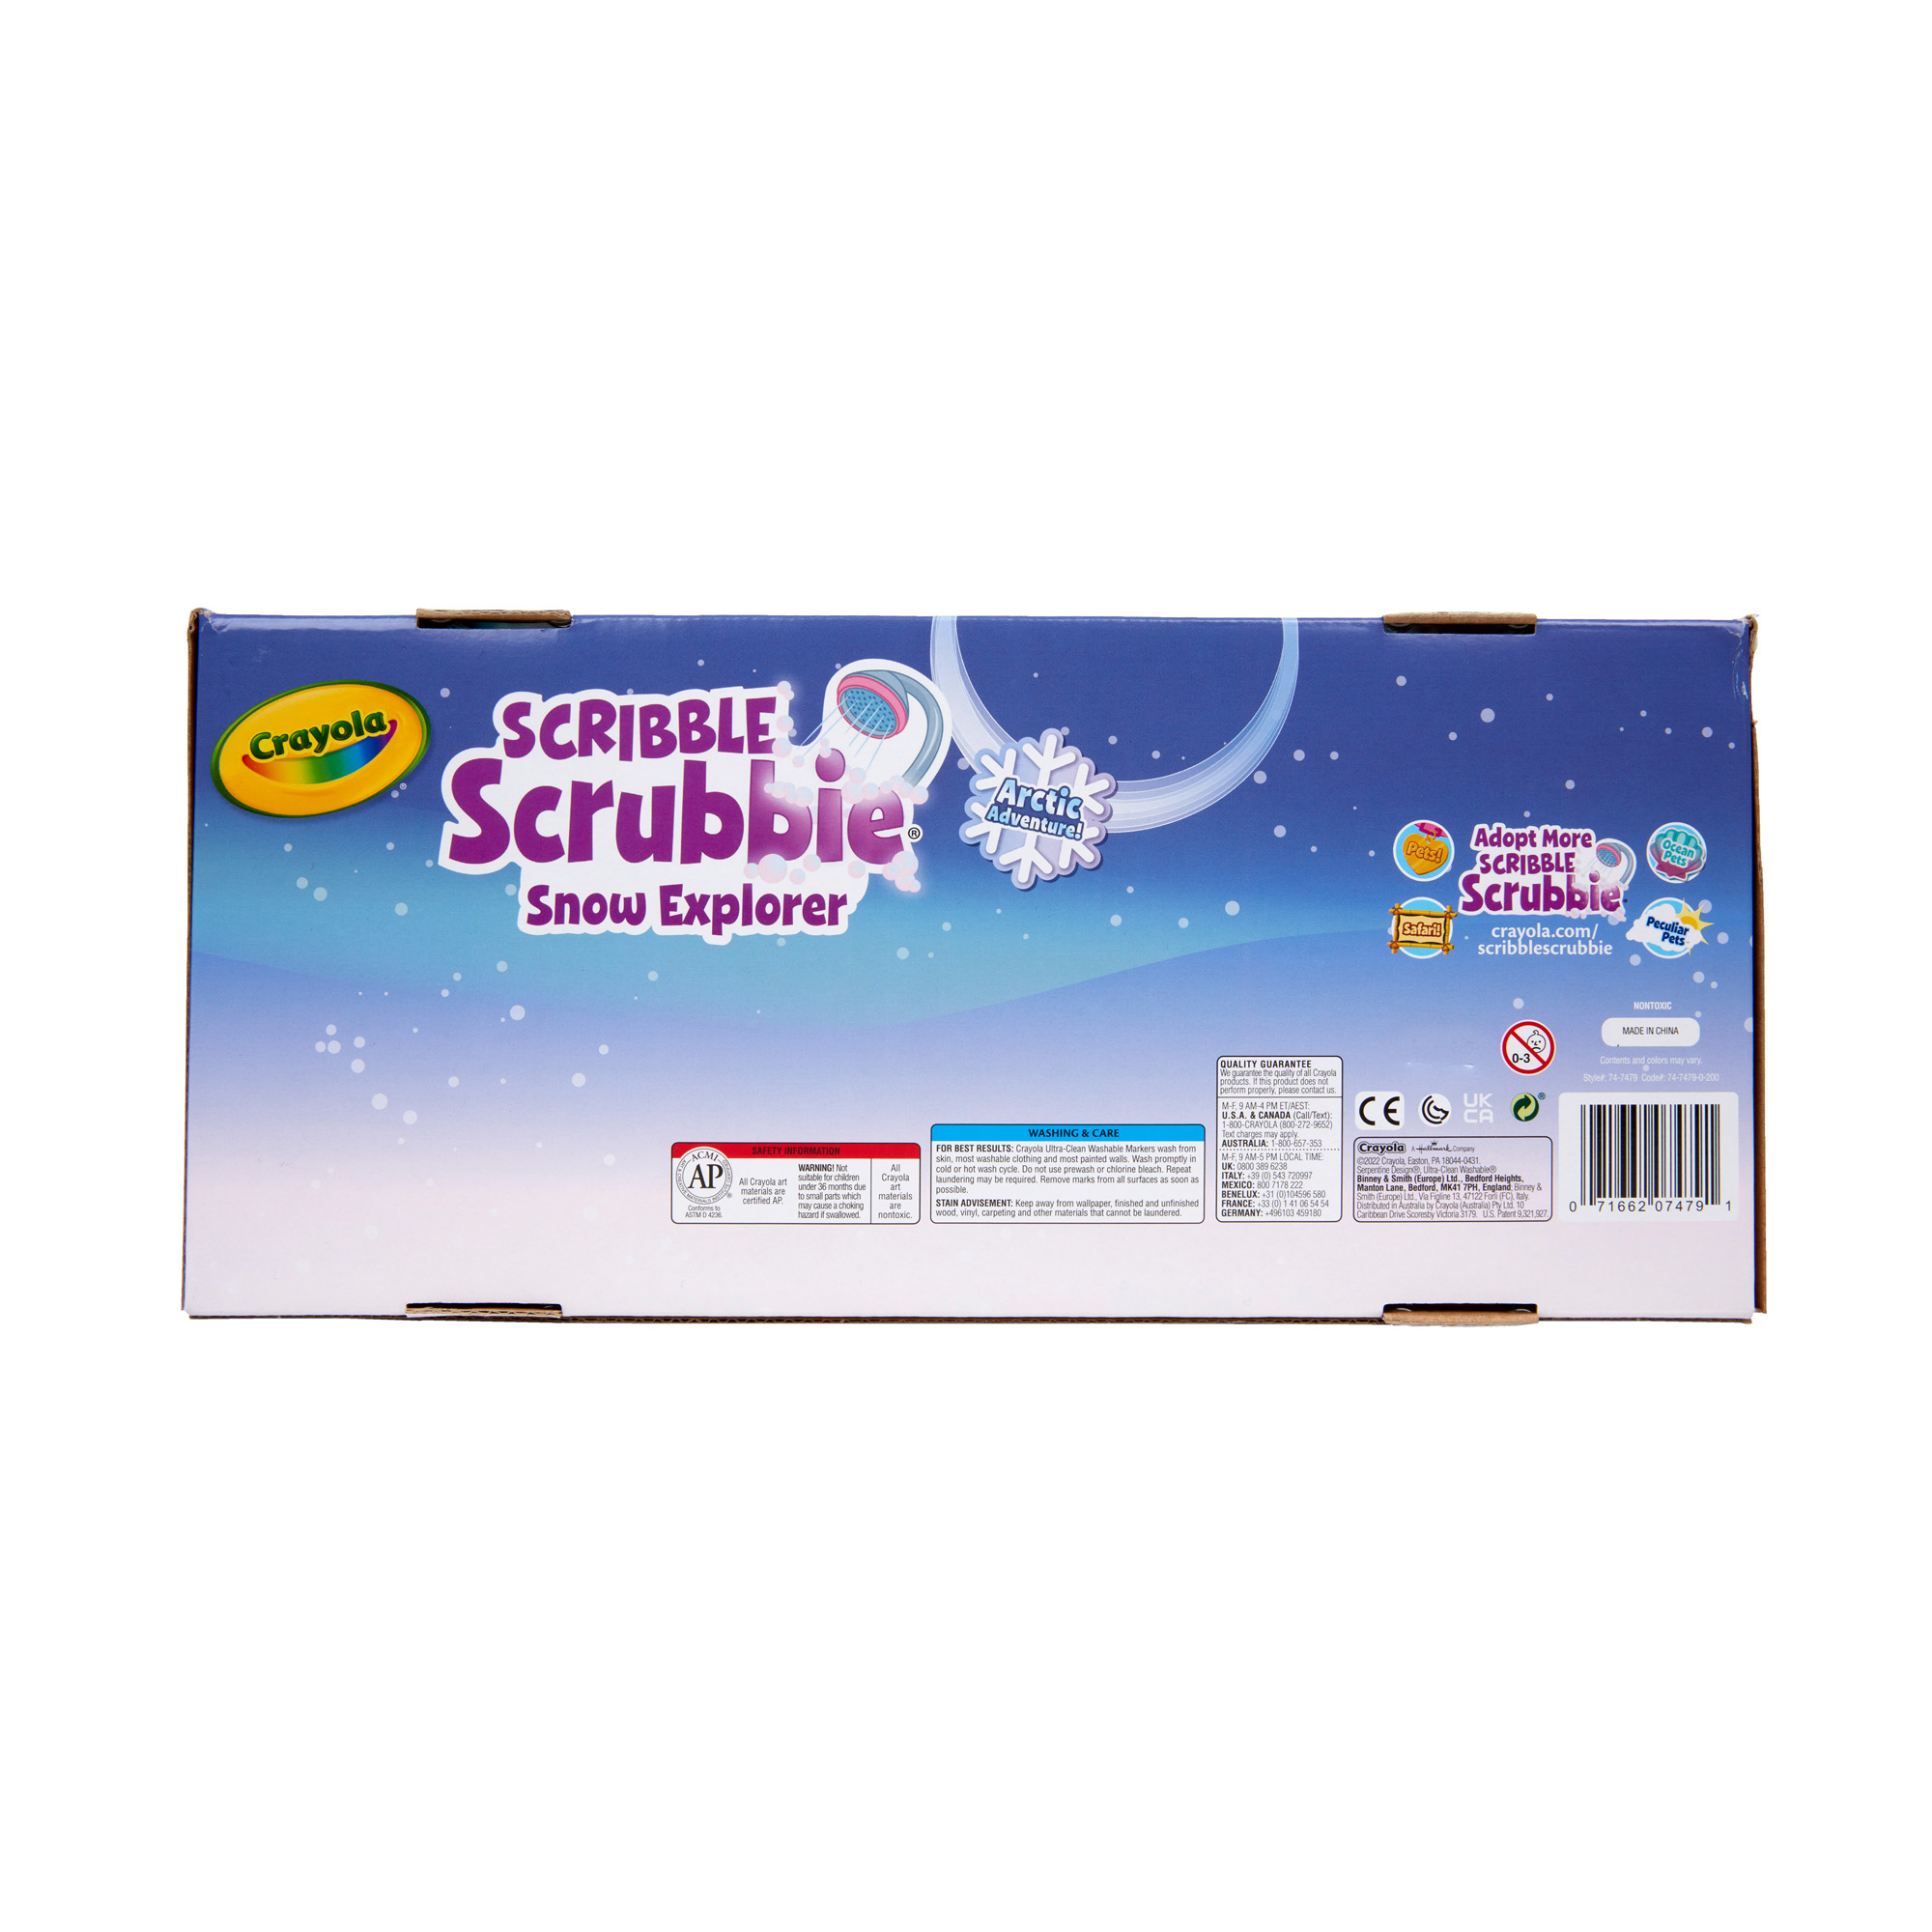 Crayola Scribble Scrubbie Peculiar … curated on LTK